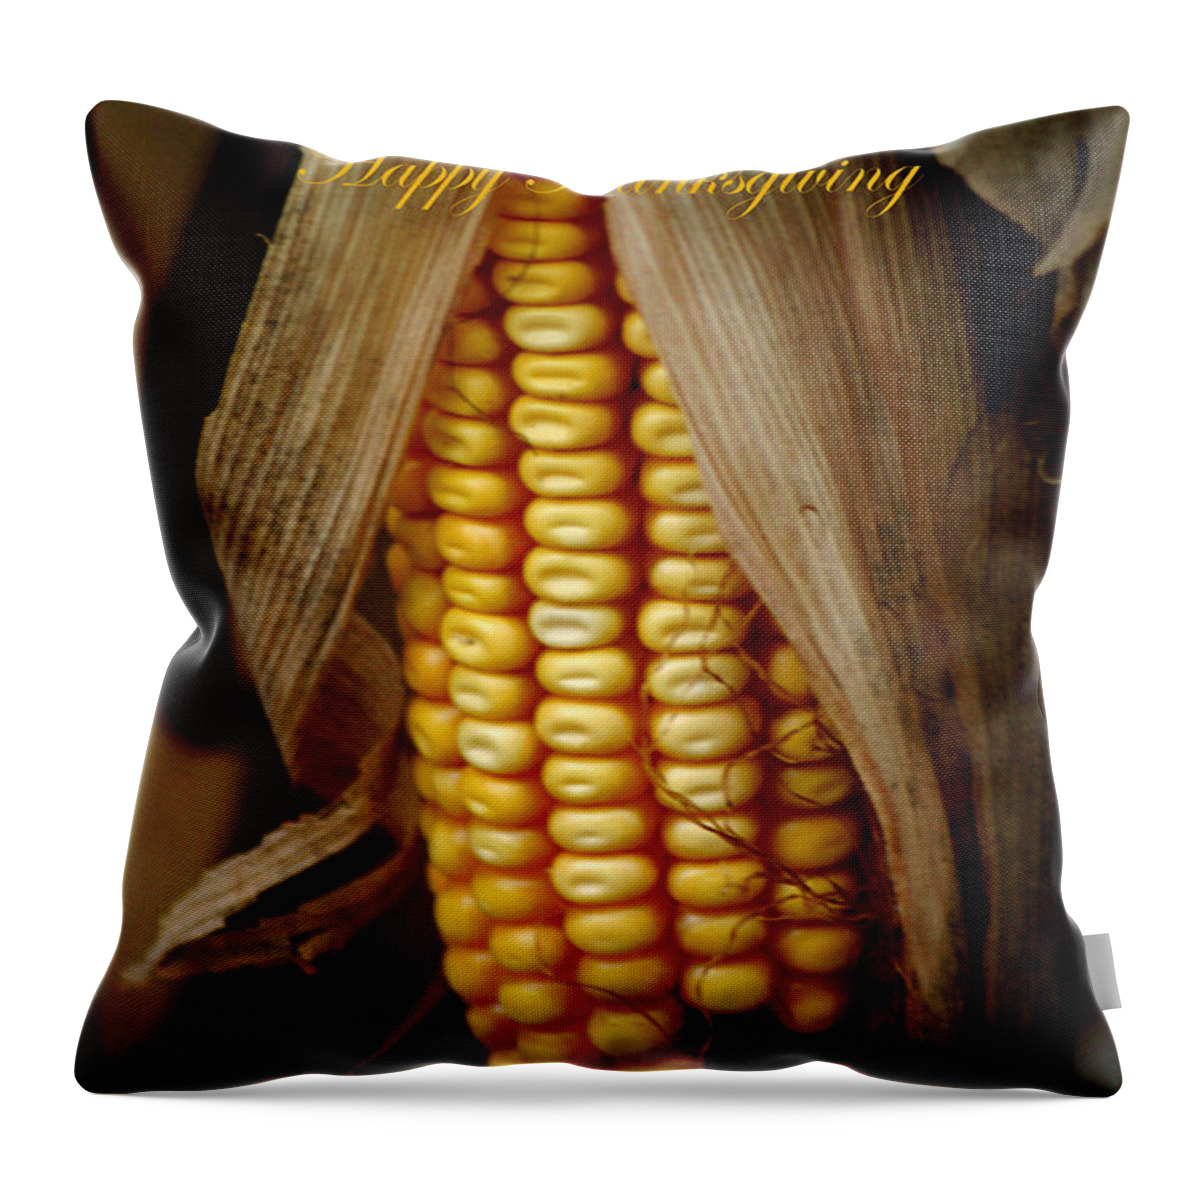 Dried Corn Throw Pillow featuring the photograph Dry Corn Husk #1 by Living Color Photography Lorraine Lynch